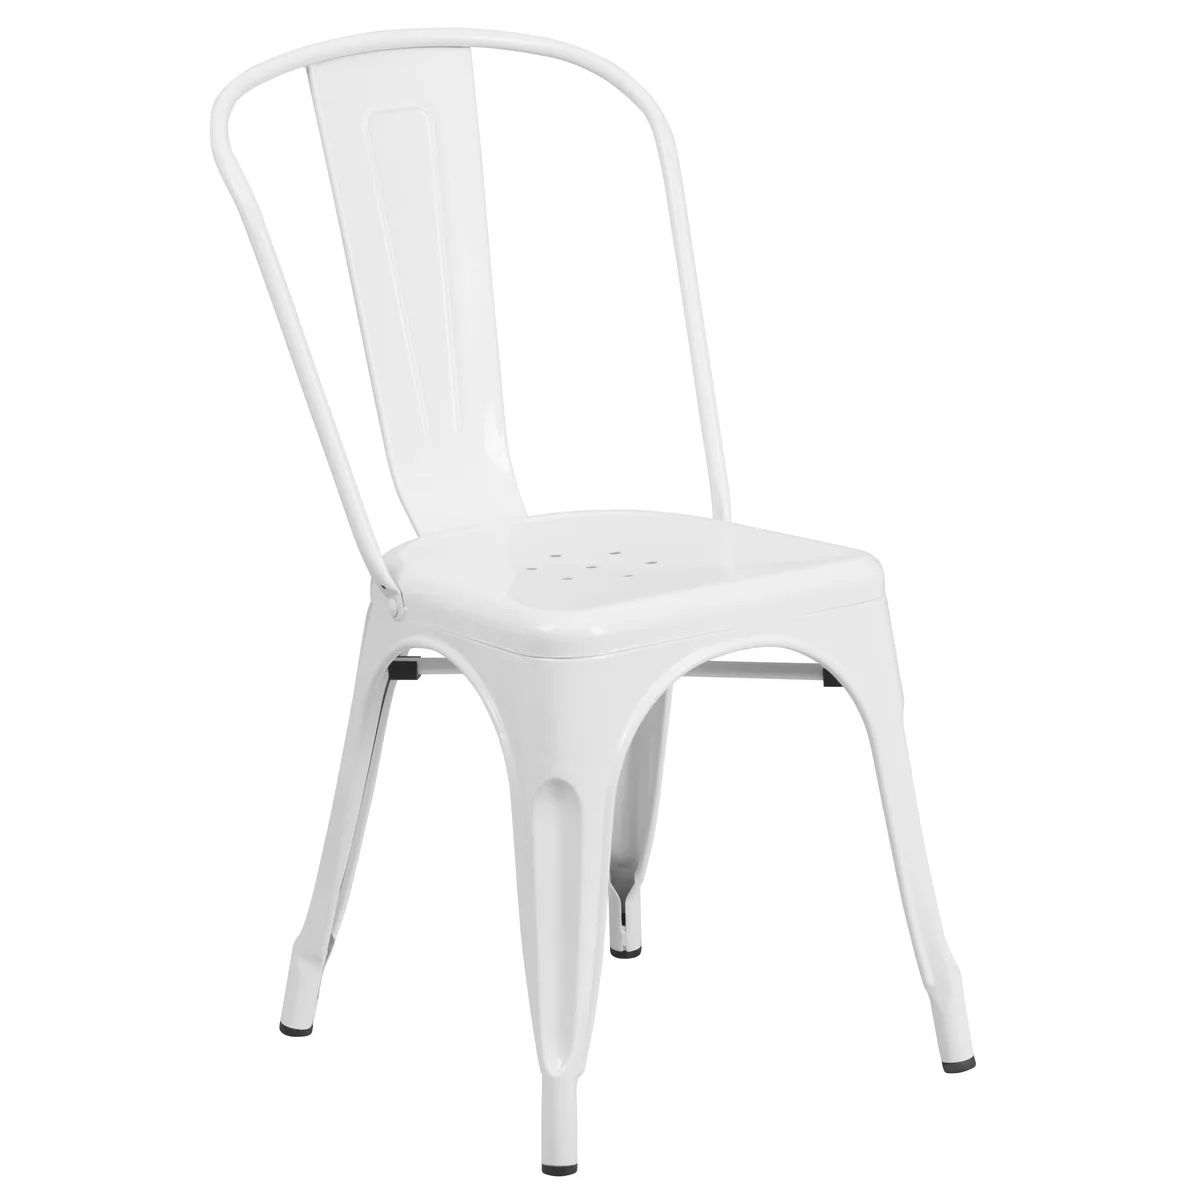 Light White Metal Dining Chair Stackable Indoor Outdoor Chair Patio kitchen Chair 